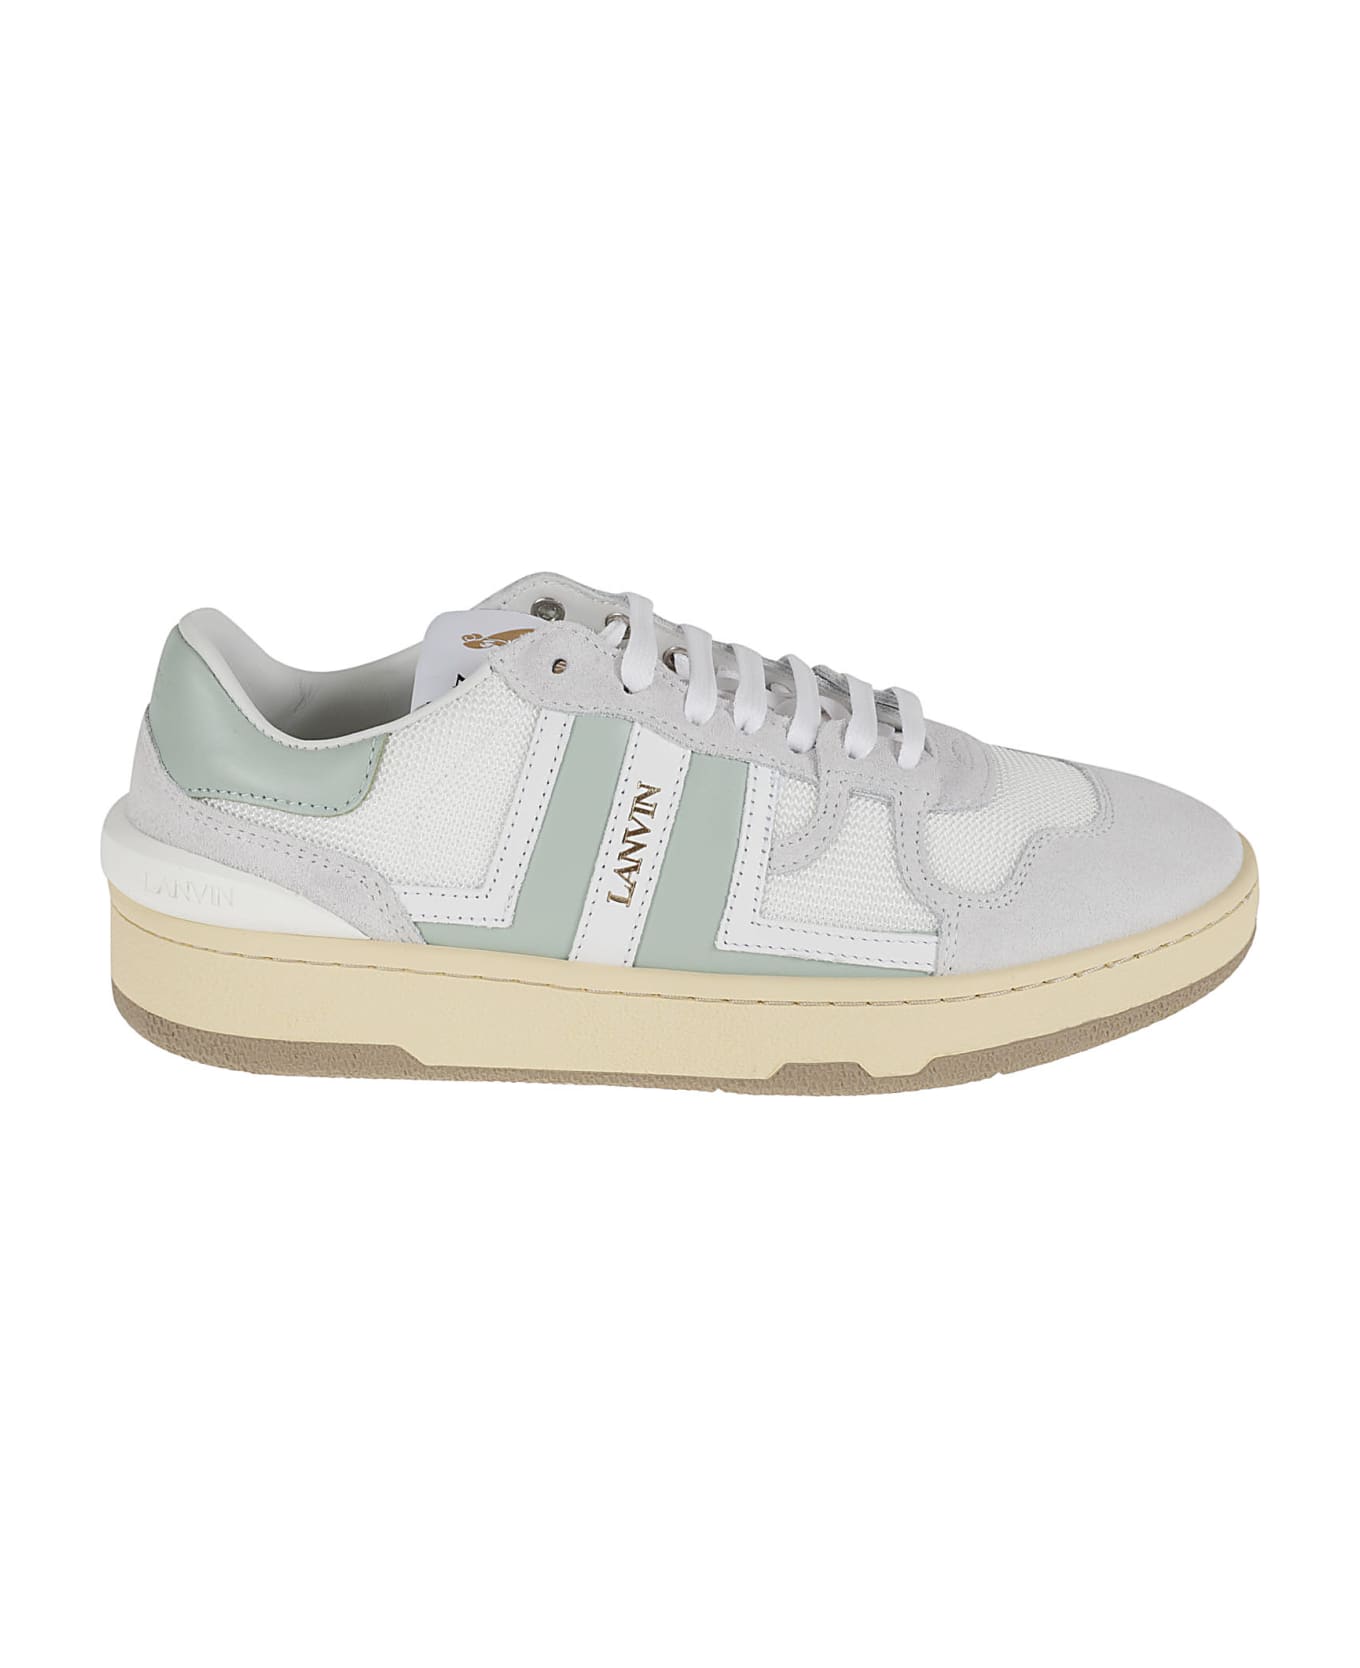 Lanvin Clay Low Top Sneakers - White/Sauge